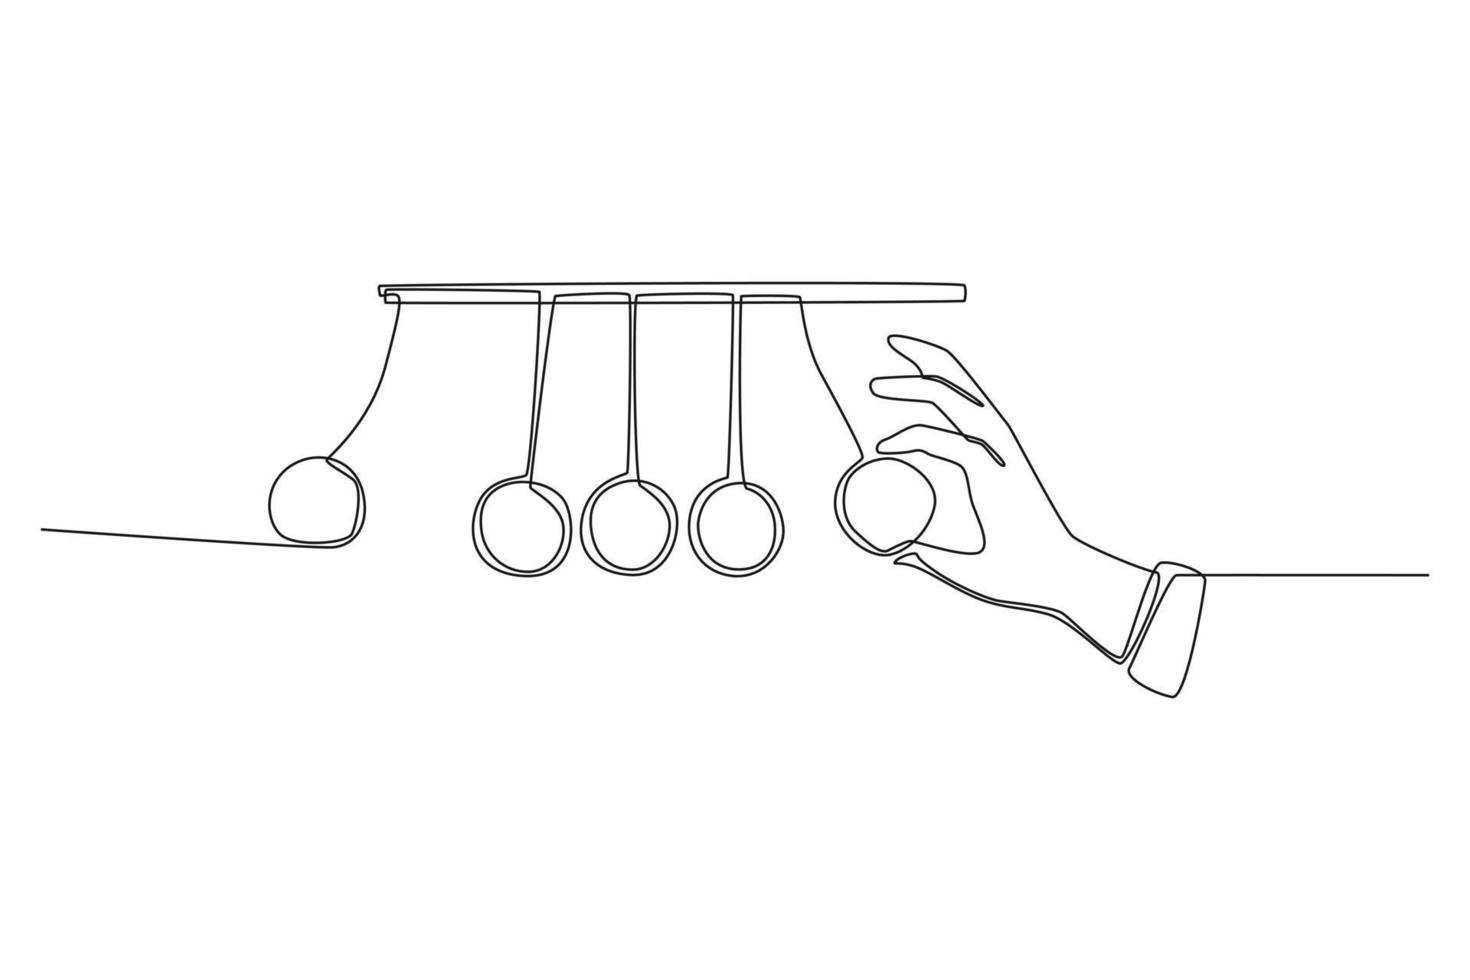 Simple continuous line drawing Newton cradle pendulums  kinetic balls hand pulling one. Subjects concept in school and university. Continuous line draw design graphic vector illustration.